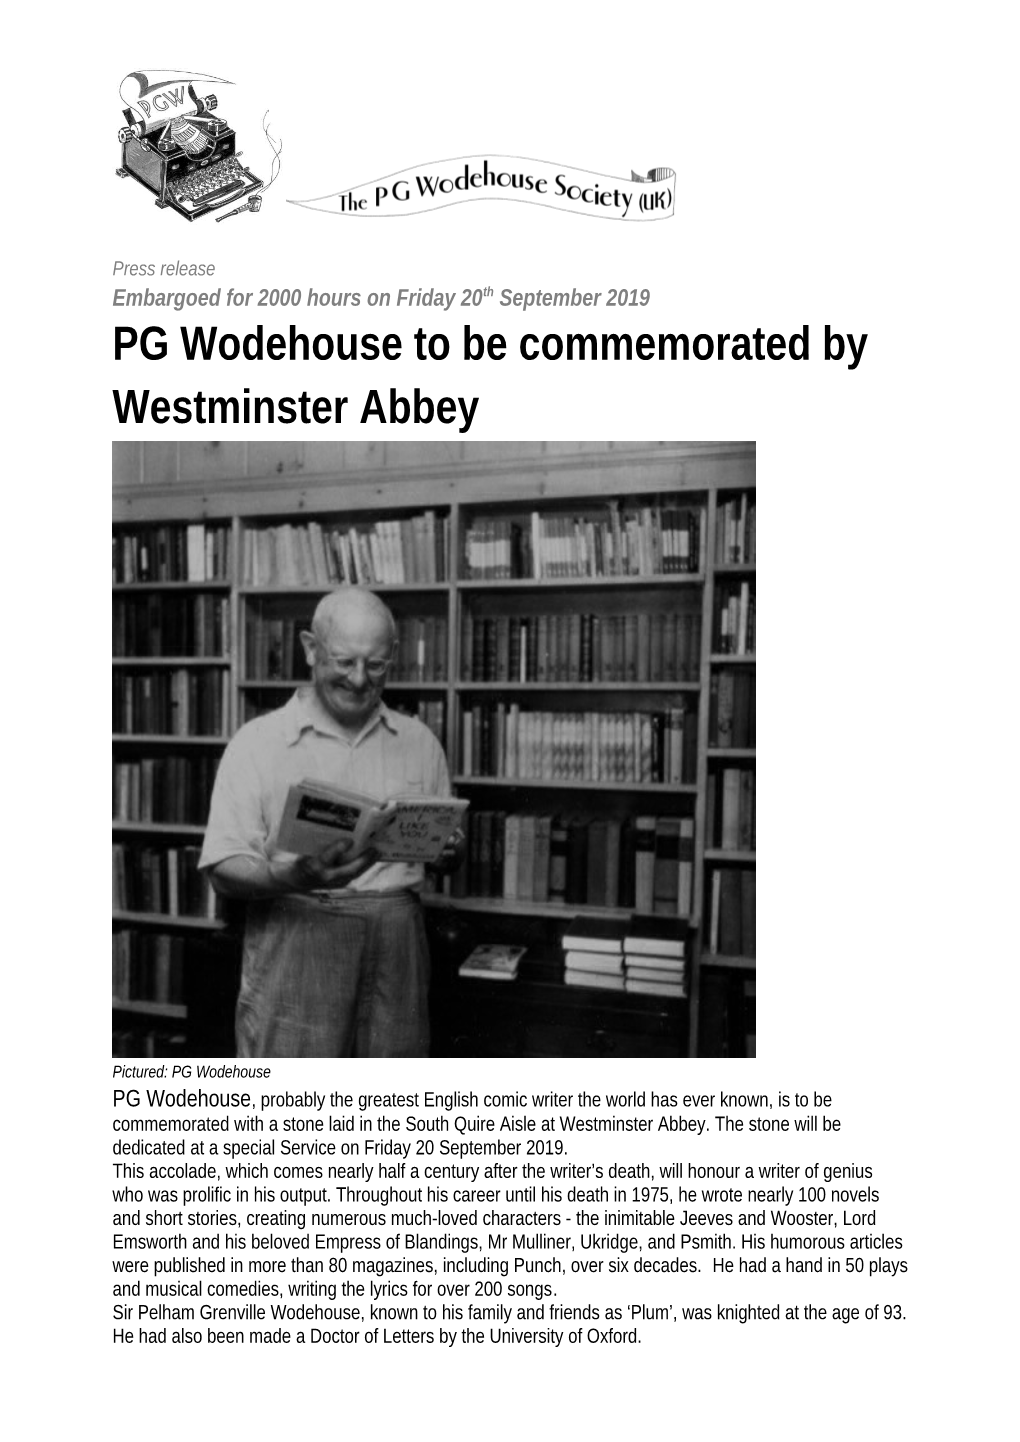 PG Wodehouse to Be Commemorated by Westminster Abbey